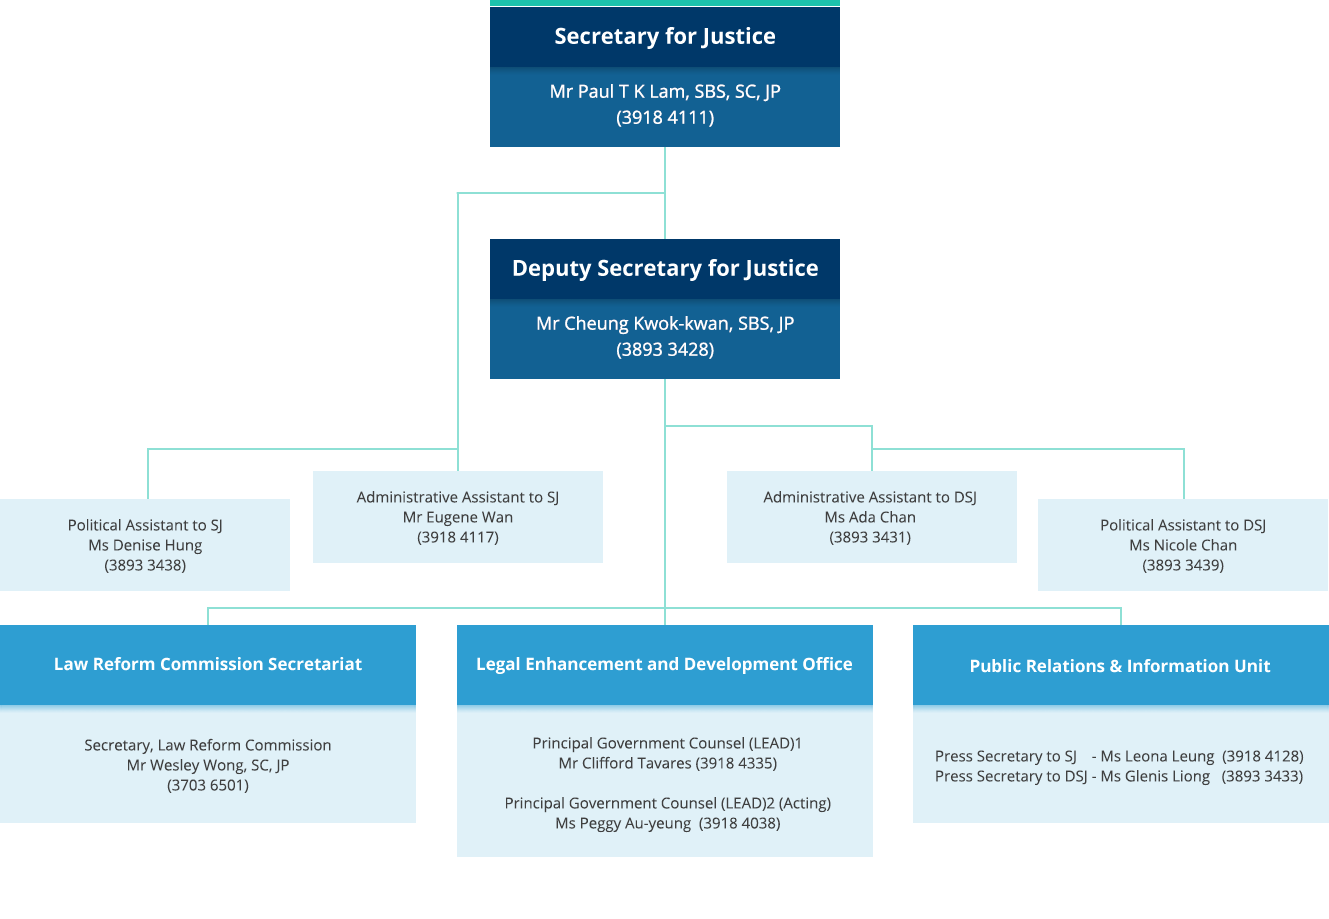 Organisation chart of the Secretary for Justice's Office. Secretary for Justice, Mr Paul T K Lam, SBS, SC, JP (3918 4111). Deputy Secretary for Justice, Mr Cheung Kwok-kwan, SBS, JP (3893 3428). Administrative Assistant to SJ, Ms Chelsea Wong (3918 4117). Political Assistant to SJ, Ms Denise Hung (3893 3438). Administrative Assistant to DSJ, Miss Bethany Choi (3893 3431). Political Assistant to DSJ, Miss Nicole Chan (3893 3439).Law Reform Commission Secretariat, Secretary, Law Reform Commission, Mr Wesley Wong, SC, JP (3918 4001). Legal Enhancement and Development Office. Principal Government Counsel (LEAD)1, Mr Clifford Tavares (3918 4335). Principal Government Counsel (LEAD)2 (Acting), Ms Peggy Au-yeung  (3918 4038). Public Relations & Information Unit. Press Secretary to SJ, Ms Daisy Kwok (3918 4128). Press Secretary to DSJ, Ms Glenis Liong (3893 3433). SJO's Coordination office